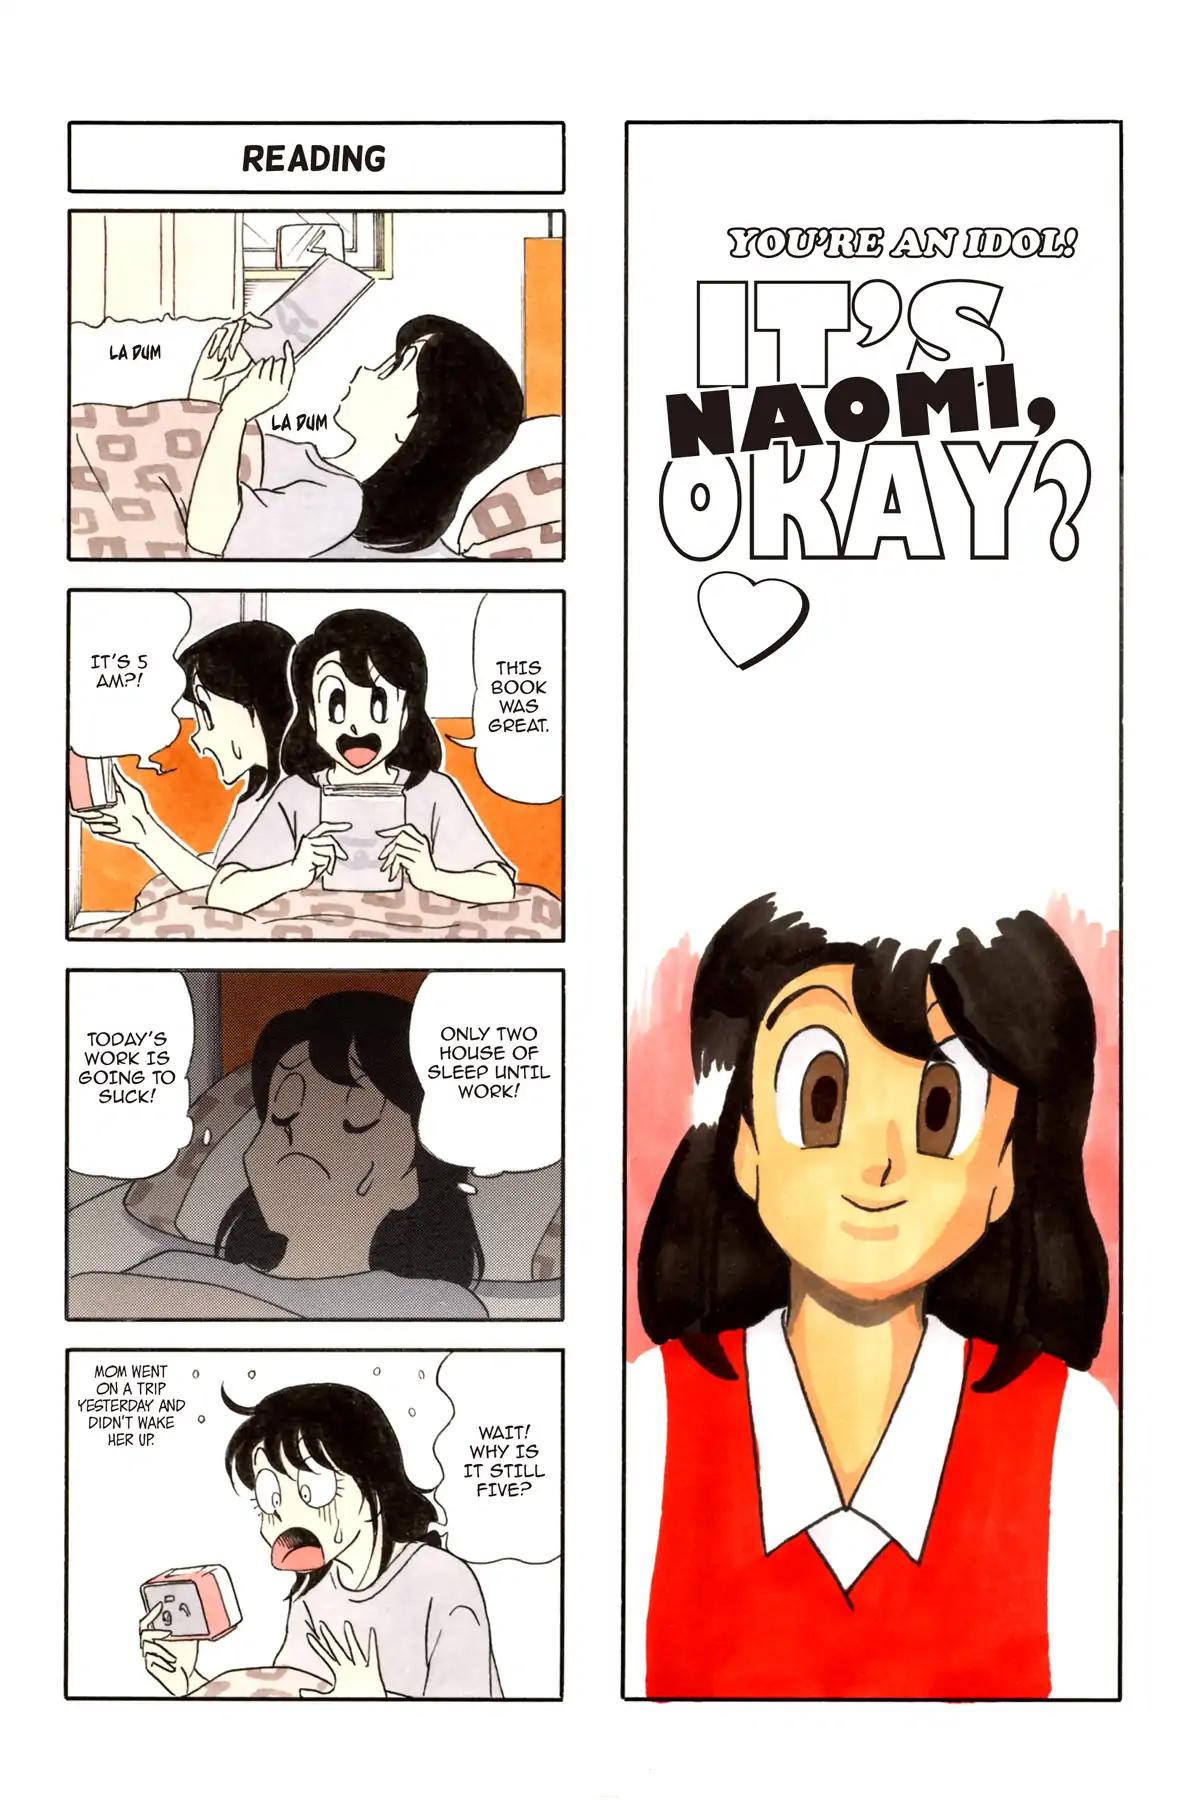 It's Naomi, Okay? After 16 Vol 1 Chapter 11